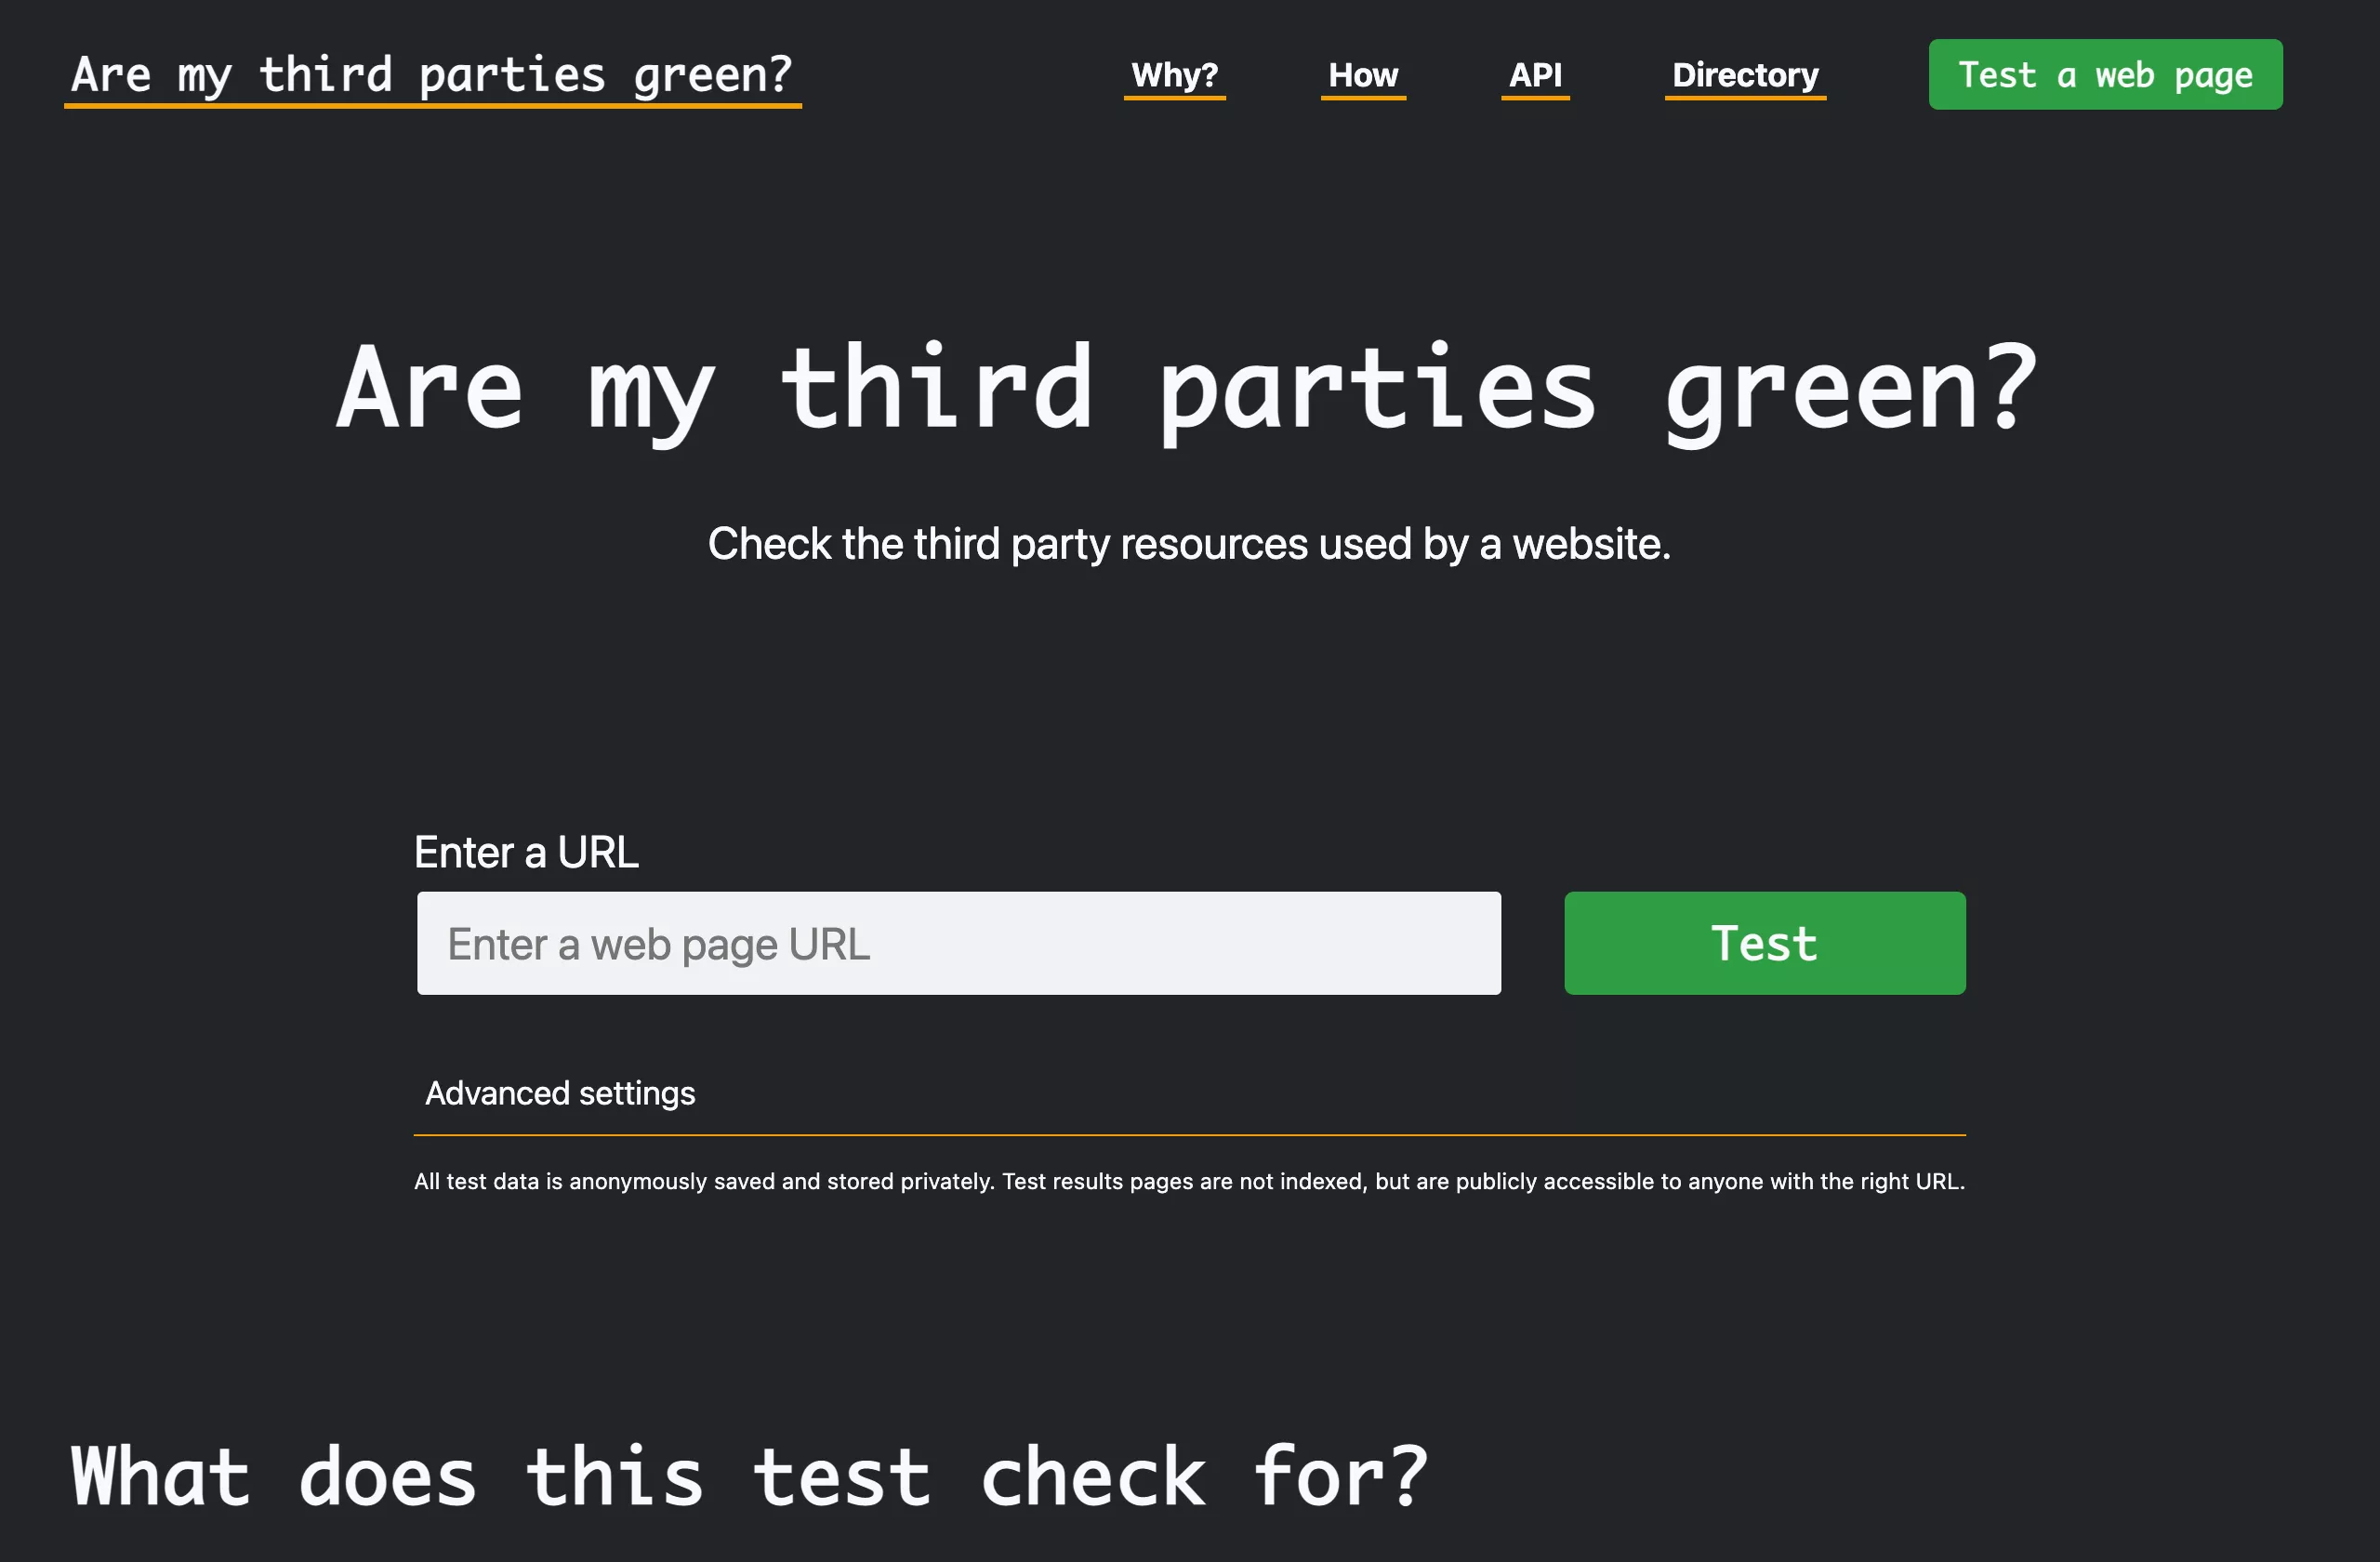 Are my third parties green?